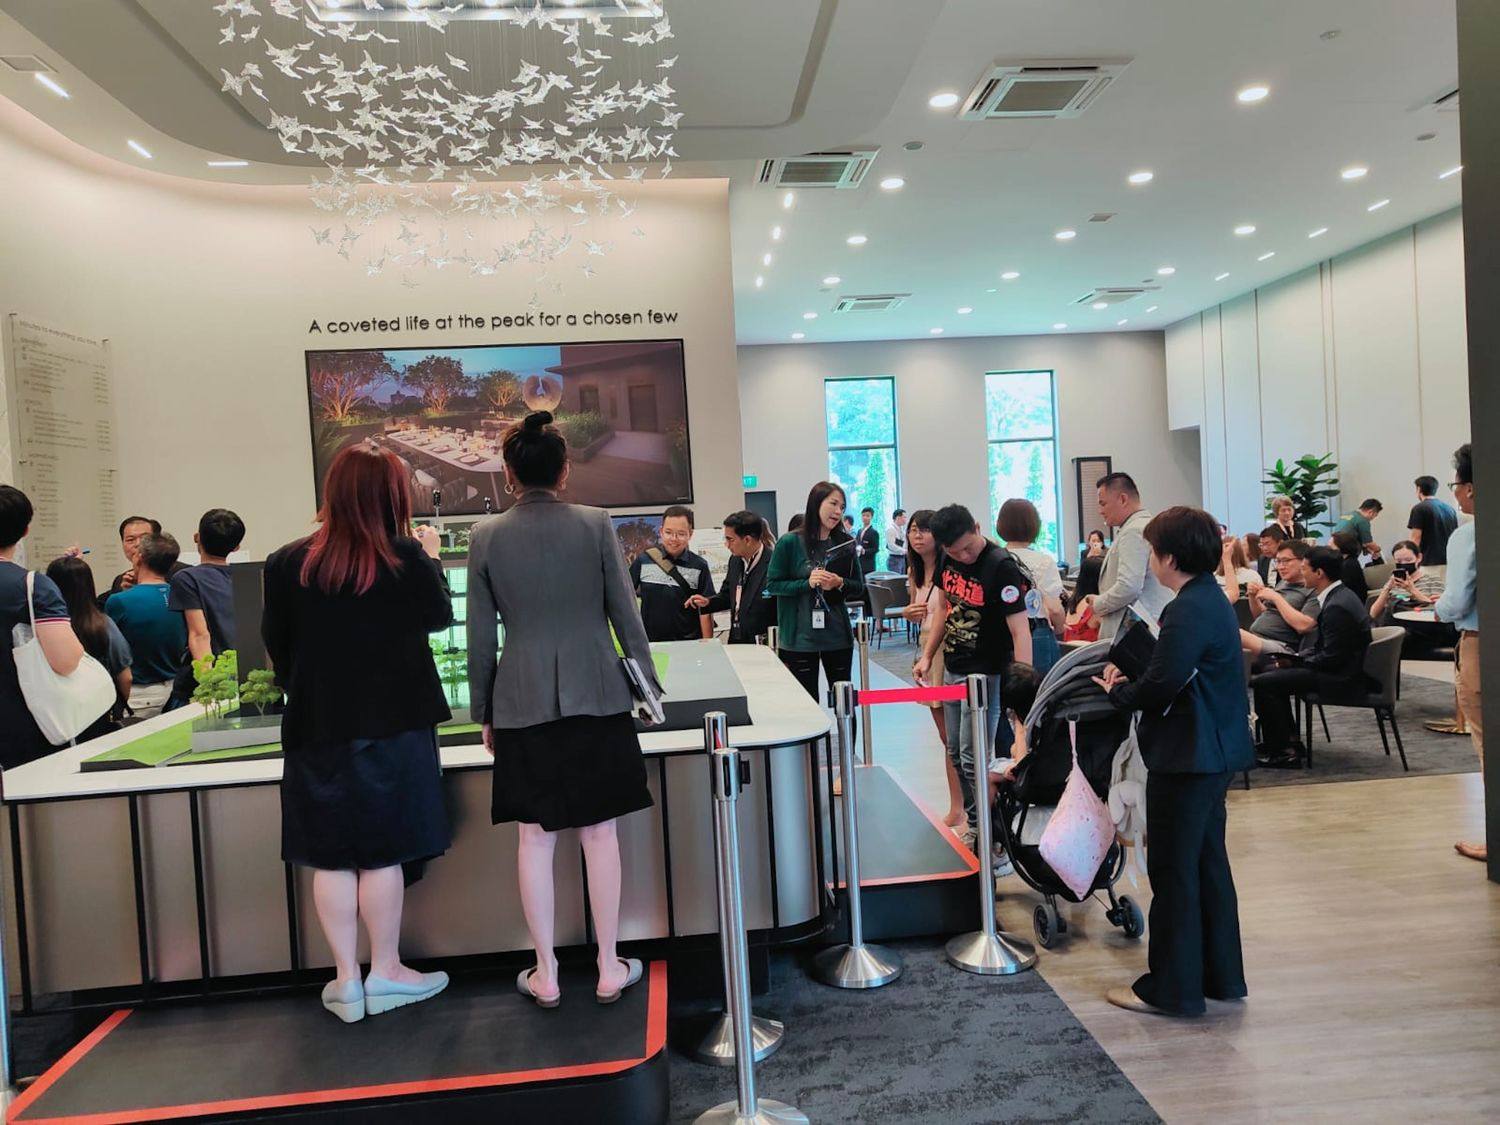 The crowd at Orchard Sophia preview. Photo: EdgeProp Singapore